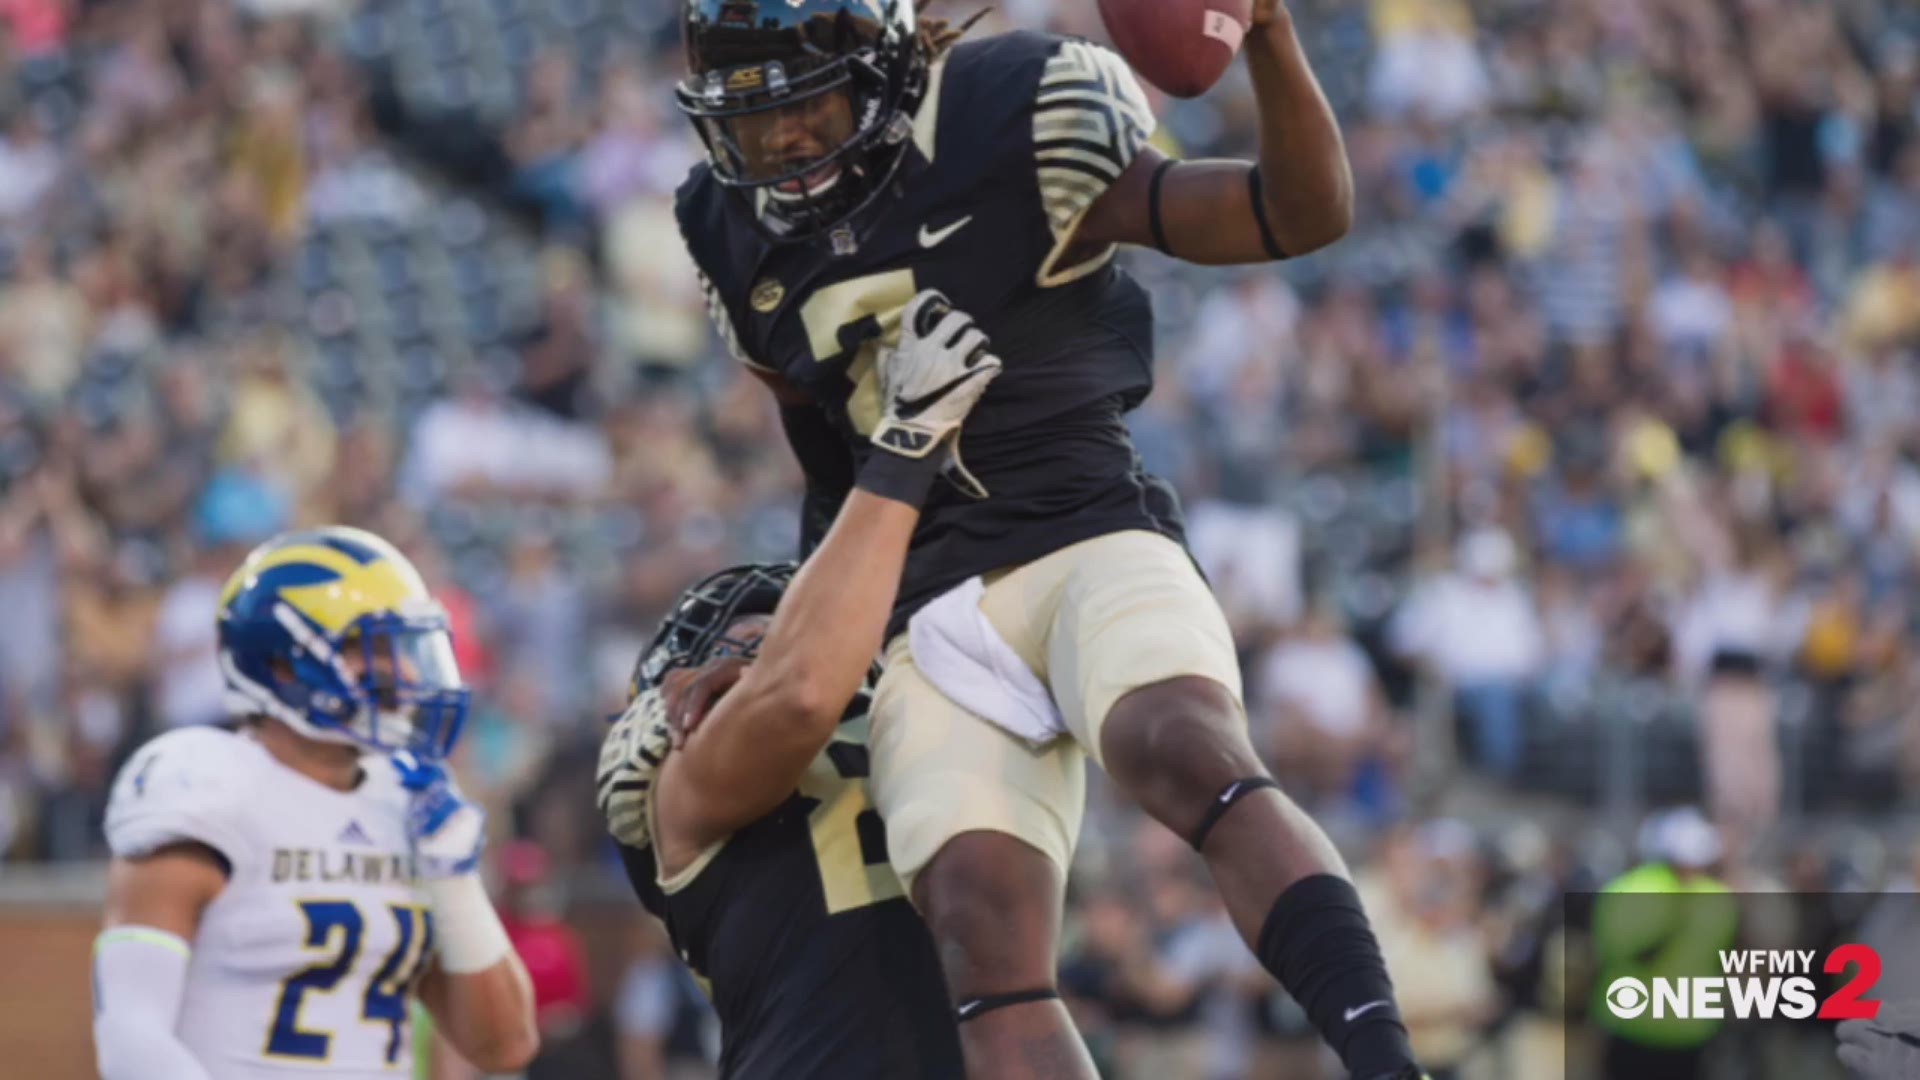 Wake Forest QB Kendall Hinton out 2-4 weeks with injury.